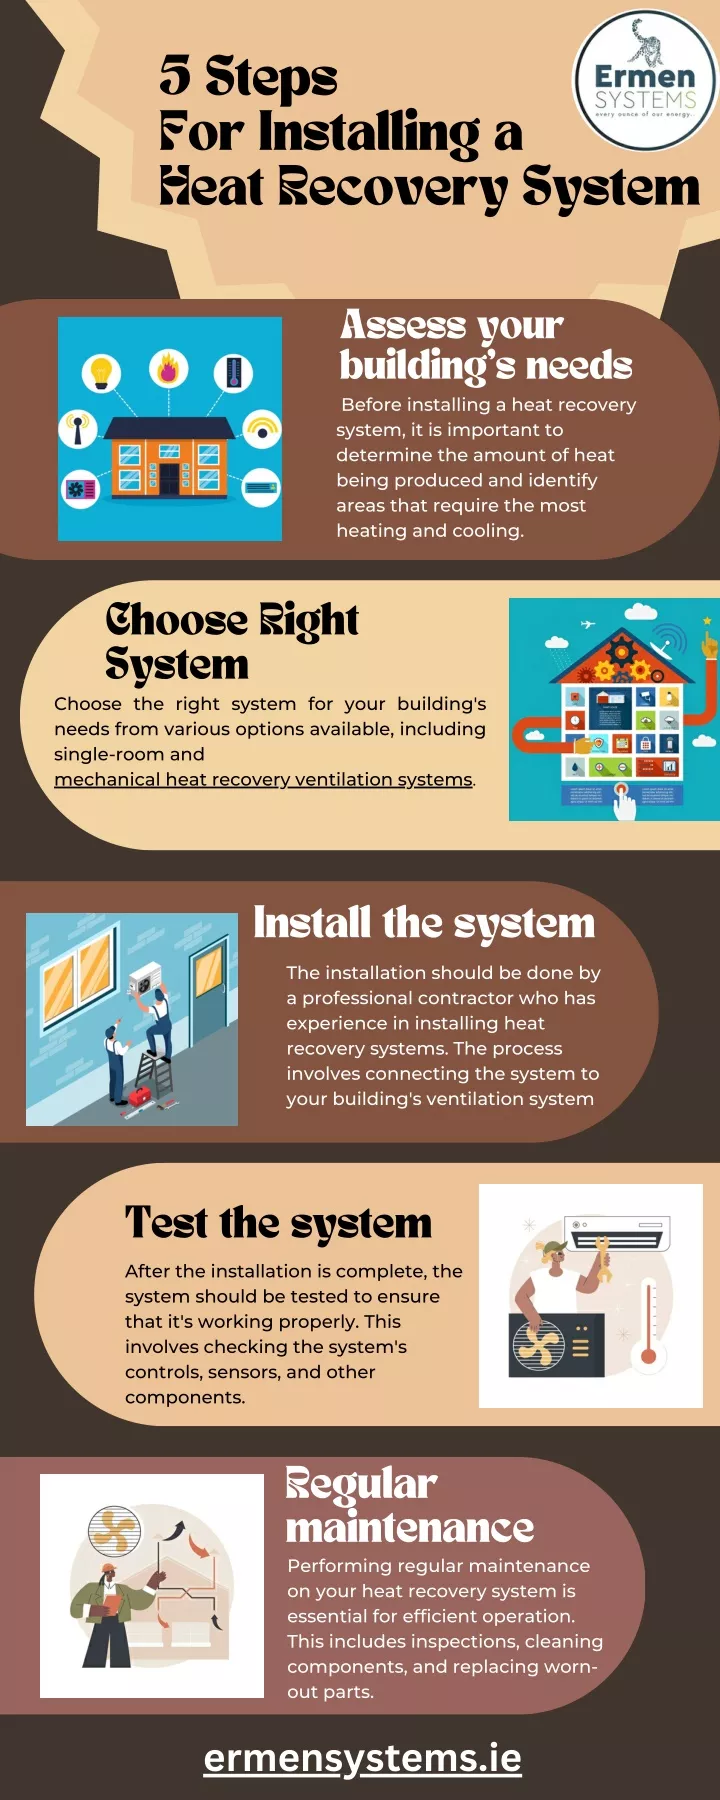 5 steps for installing a heat recovery system